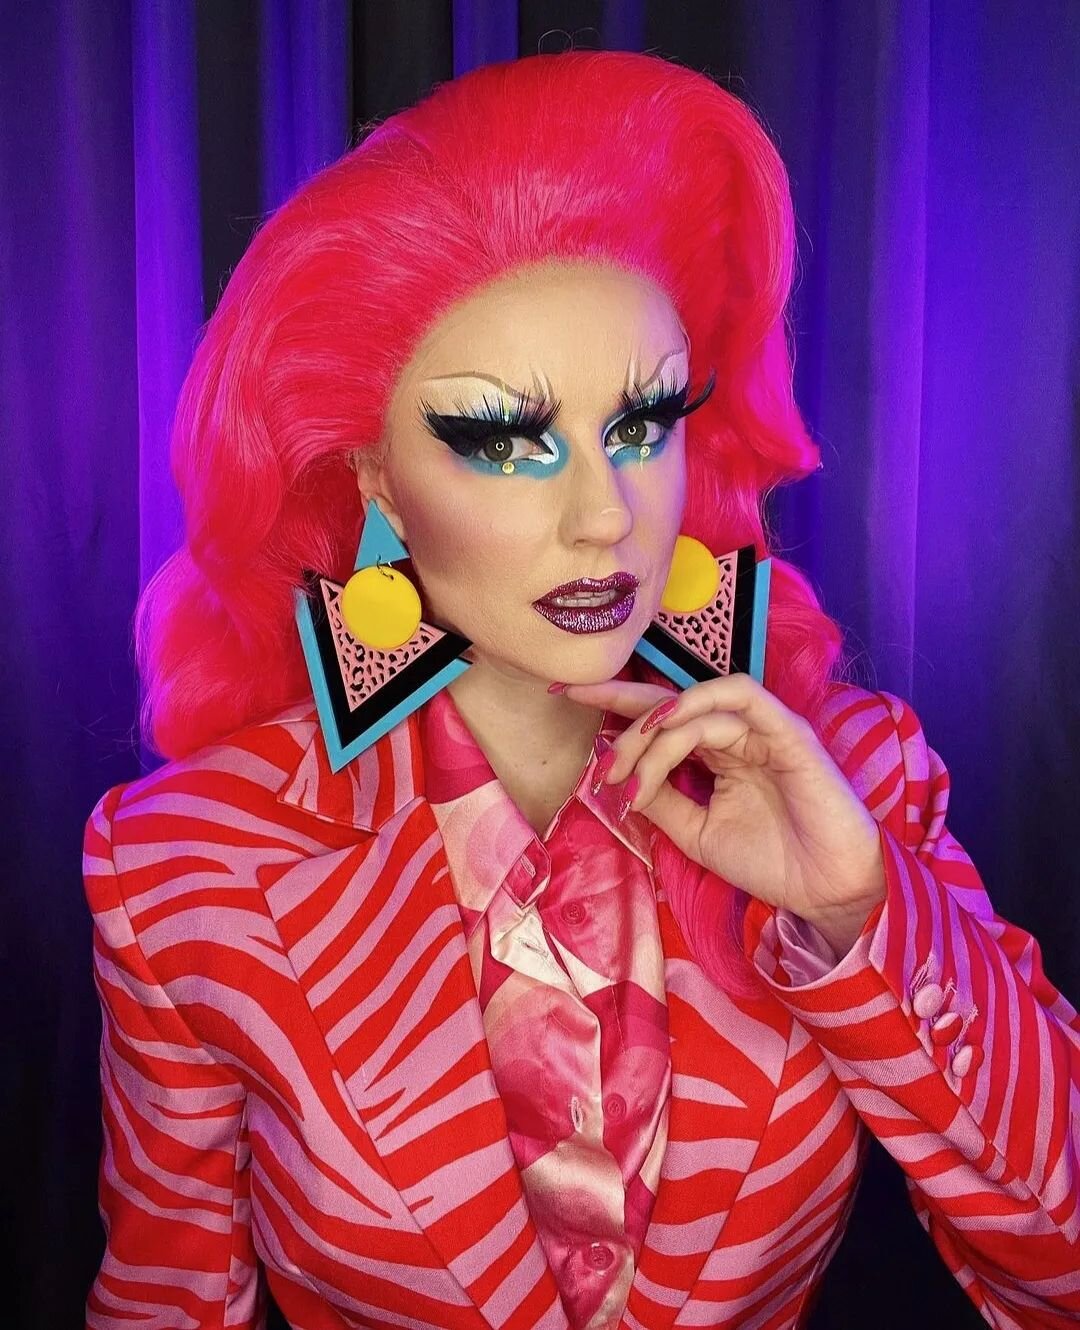 PINK PUNK @rubyslippers wears my 'Abstraction' statement earrings and wig by @v.istoso for a look that smooshes together Bowie's 'Life On Mars' era suiting with Jem and the Holograms (aka The Ultimate) 💫💗💫

Statement earrings re-stocked and new co